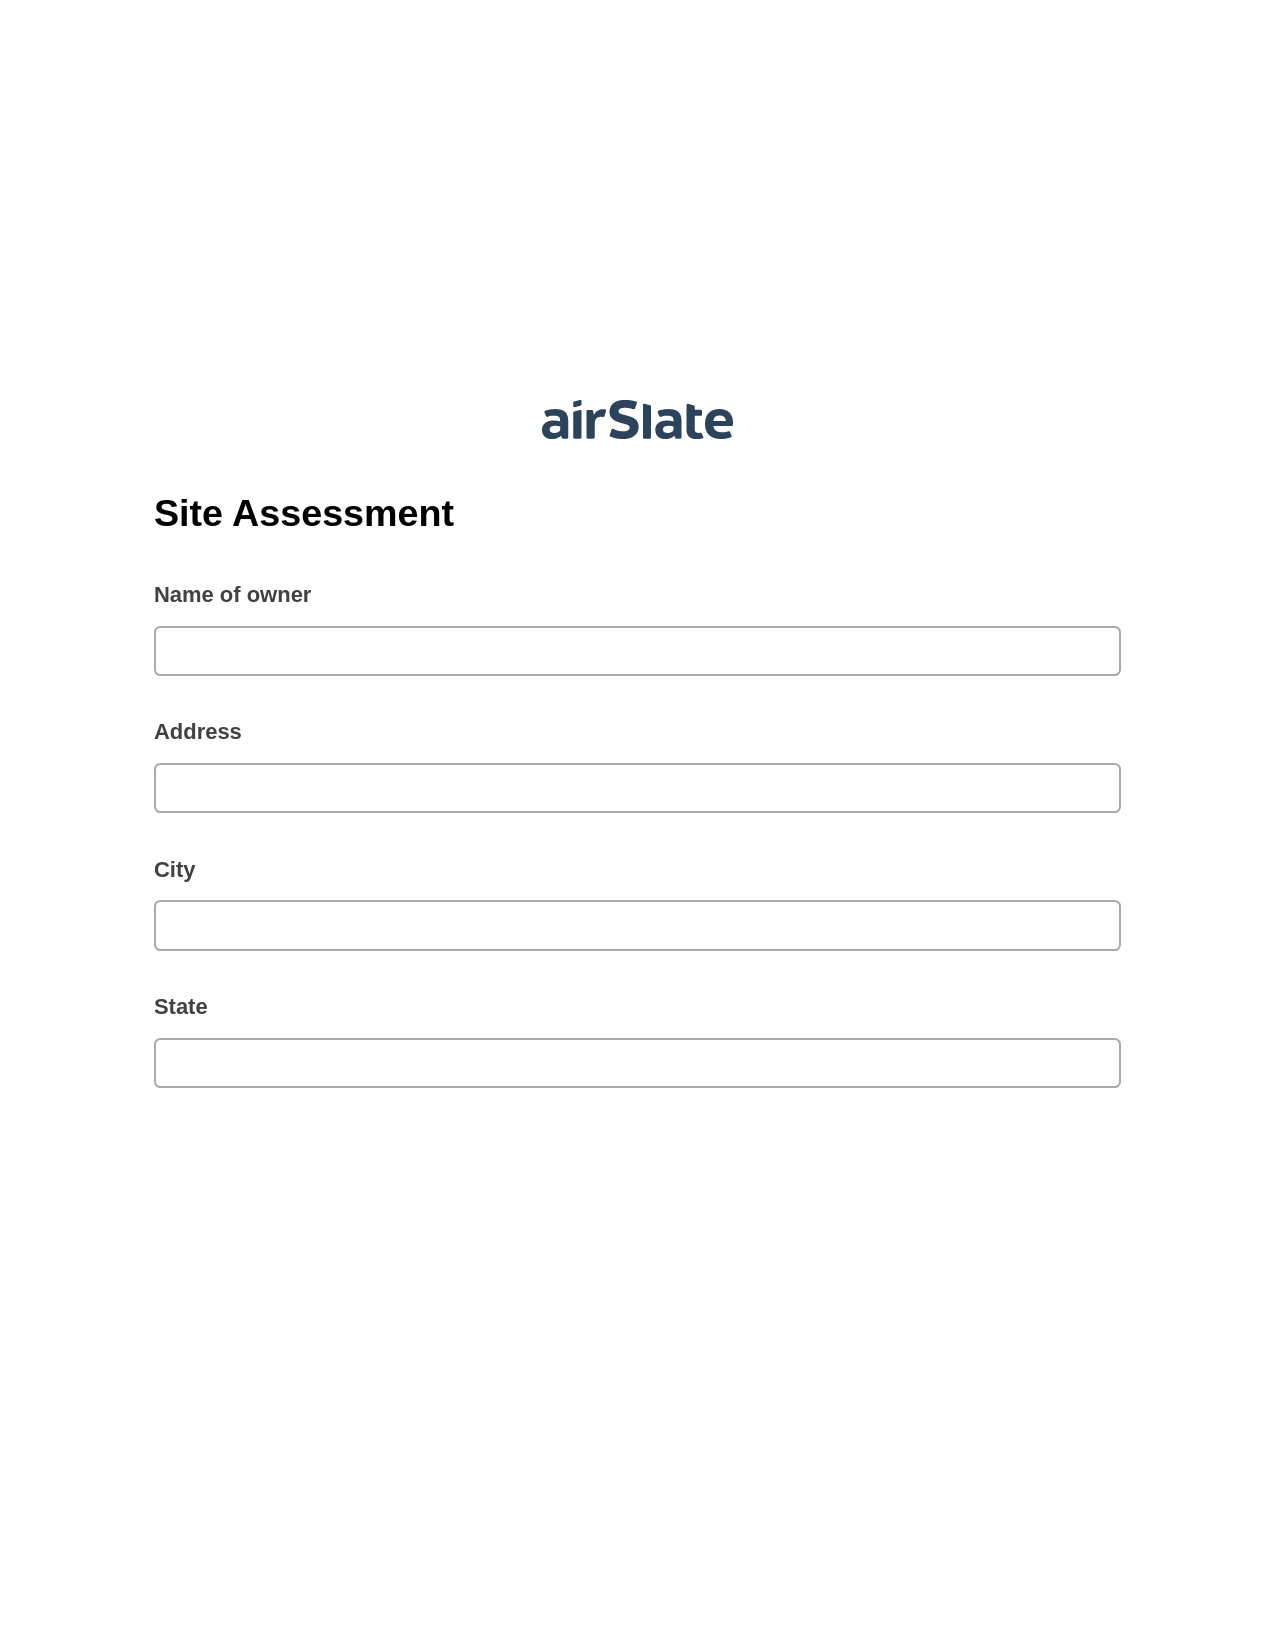 Site Assessment Pre-fill Dropdown from Airtable, Slack Notification Bot, Slack Notification Postfinish Bot